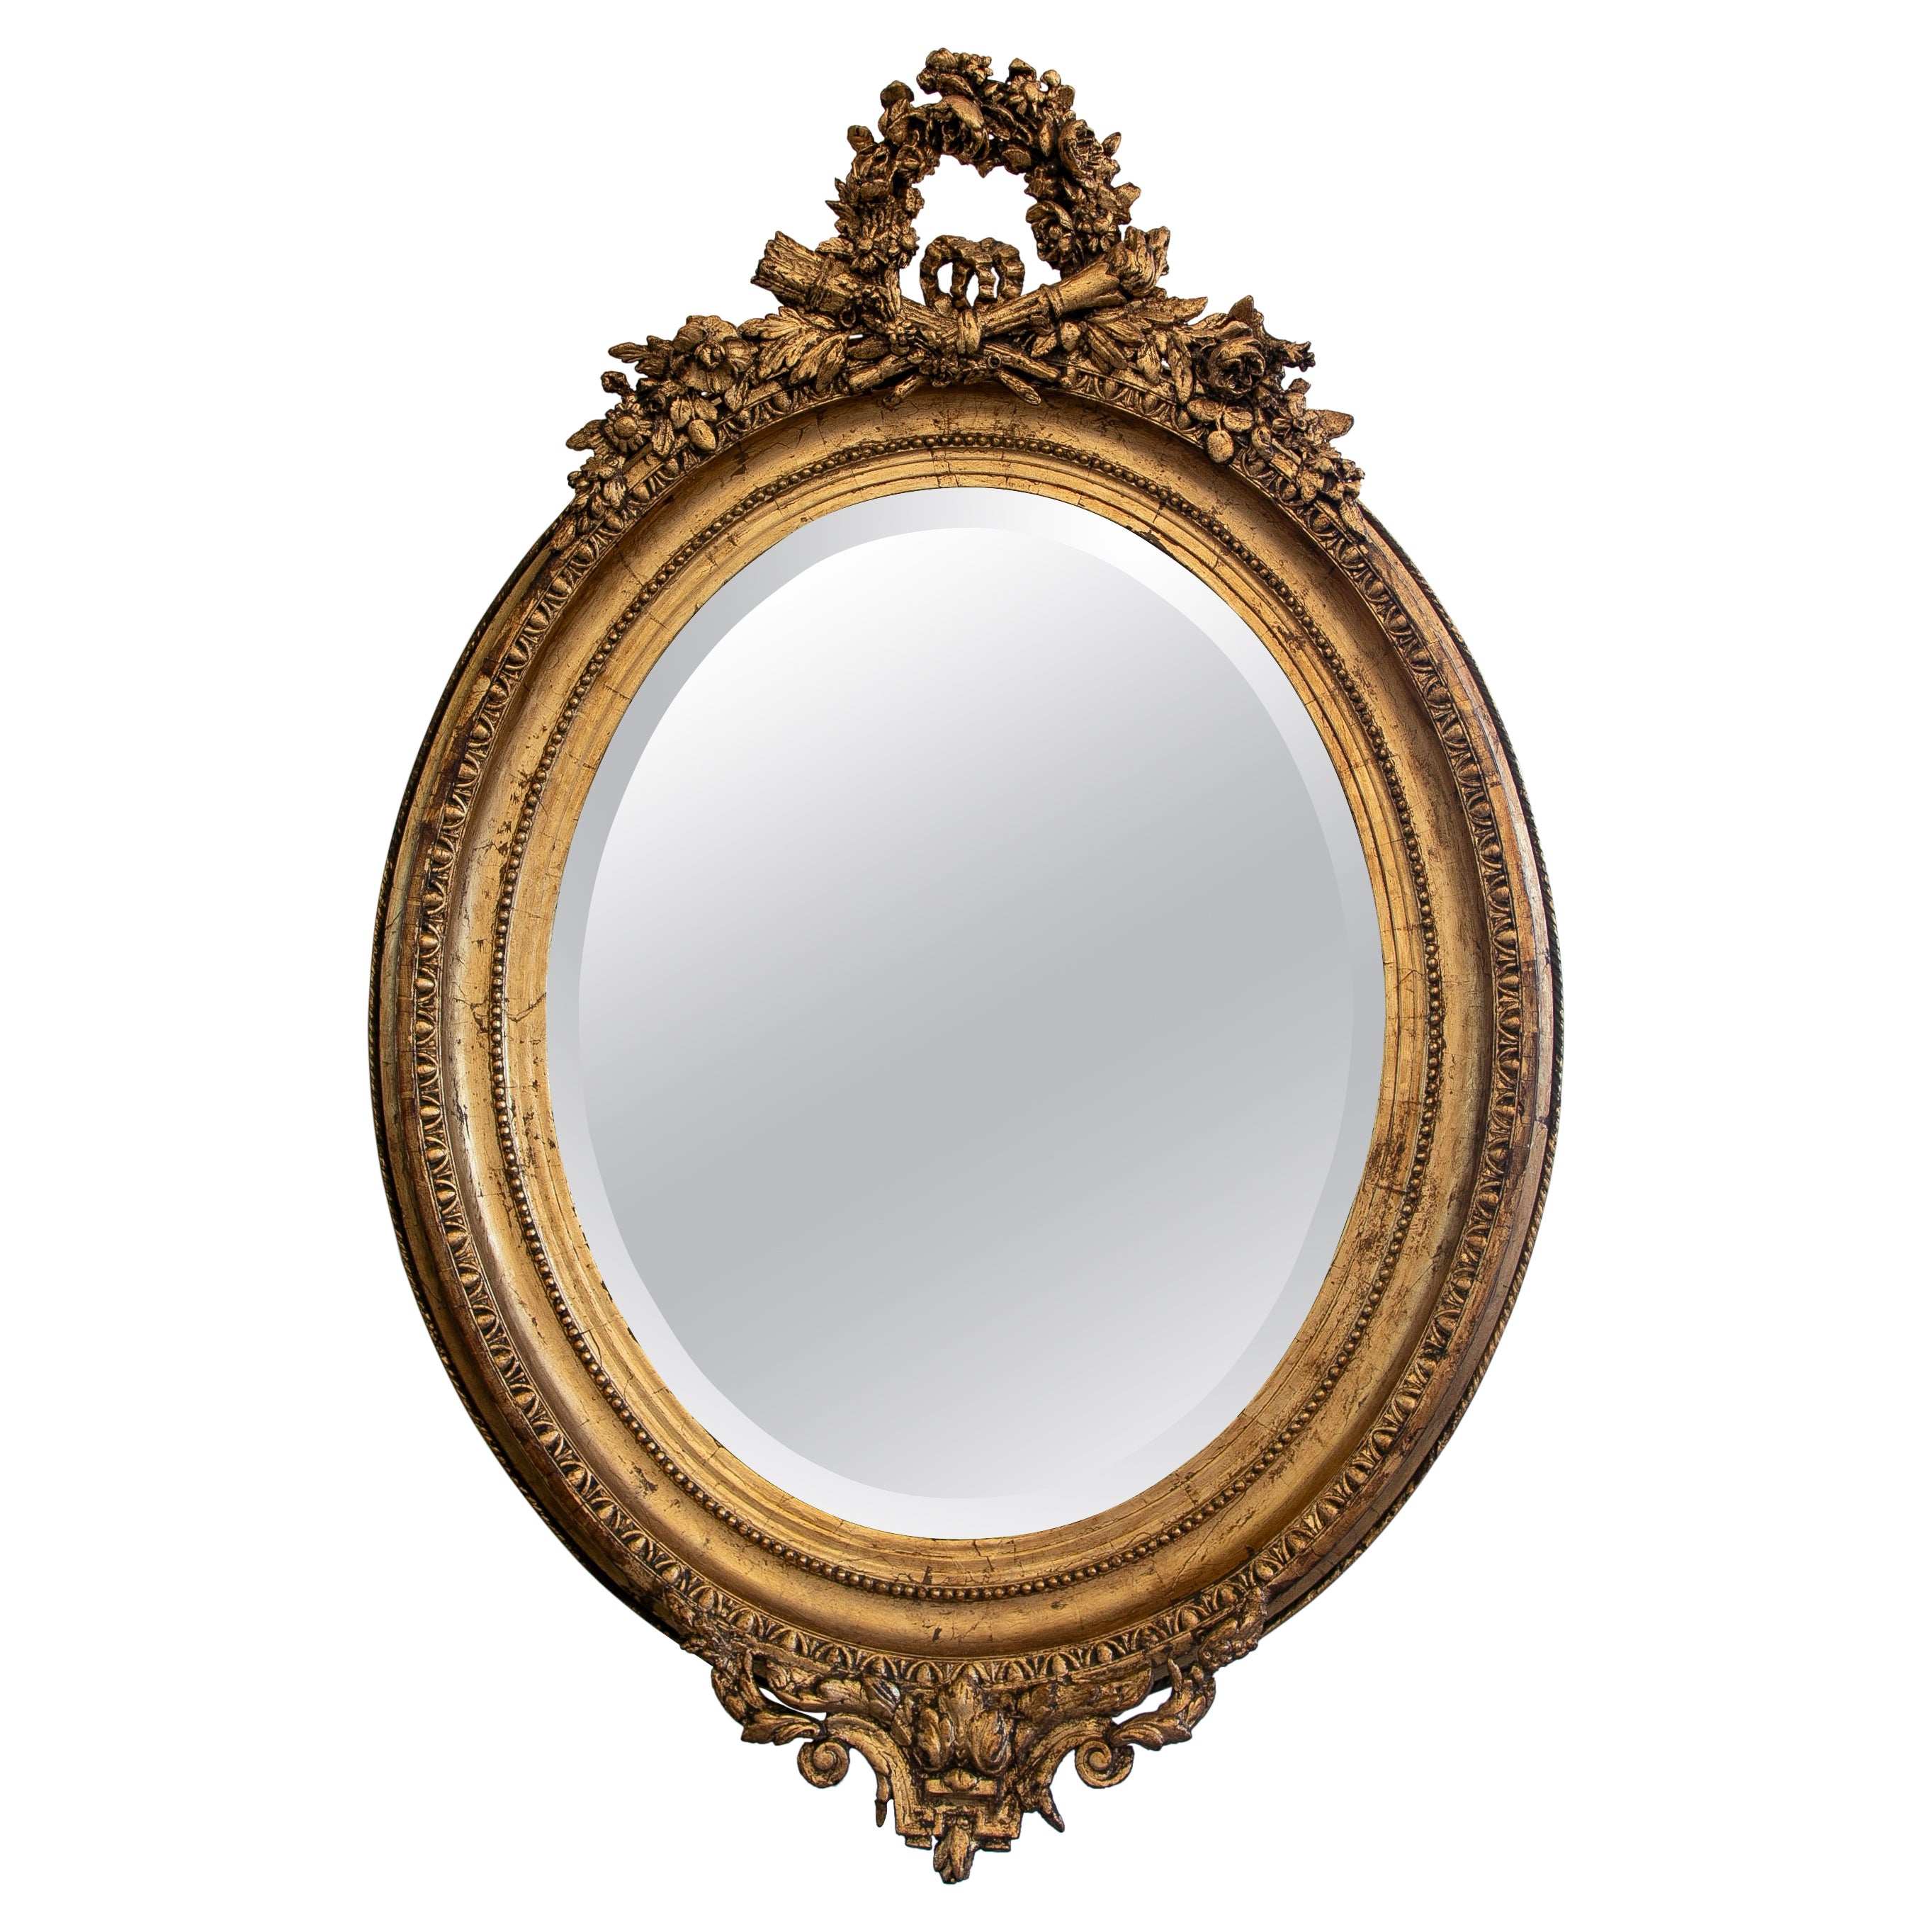 French Oval Mirror with Gold Tones and Flower Garland Coping